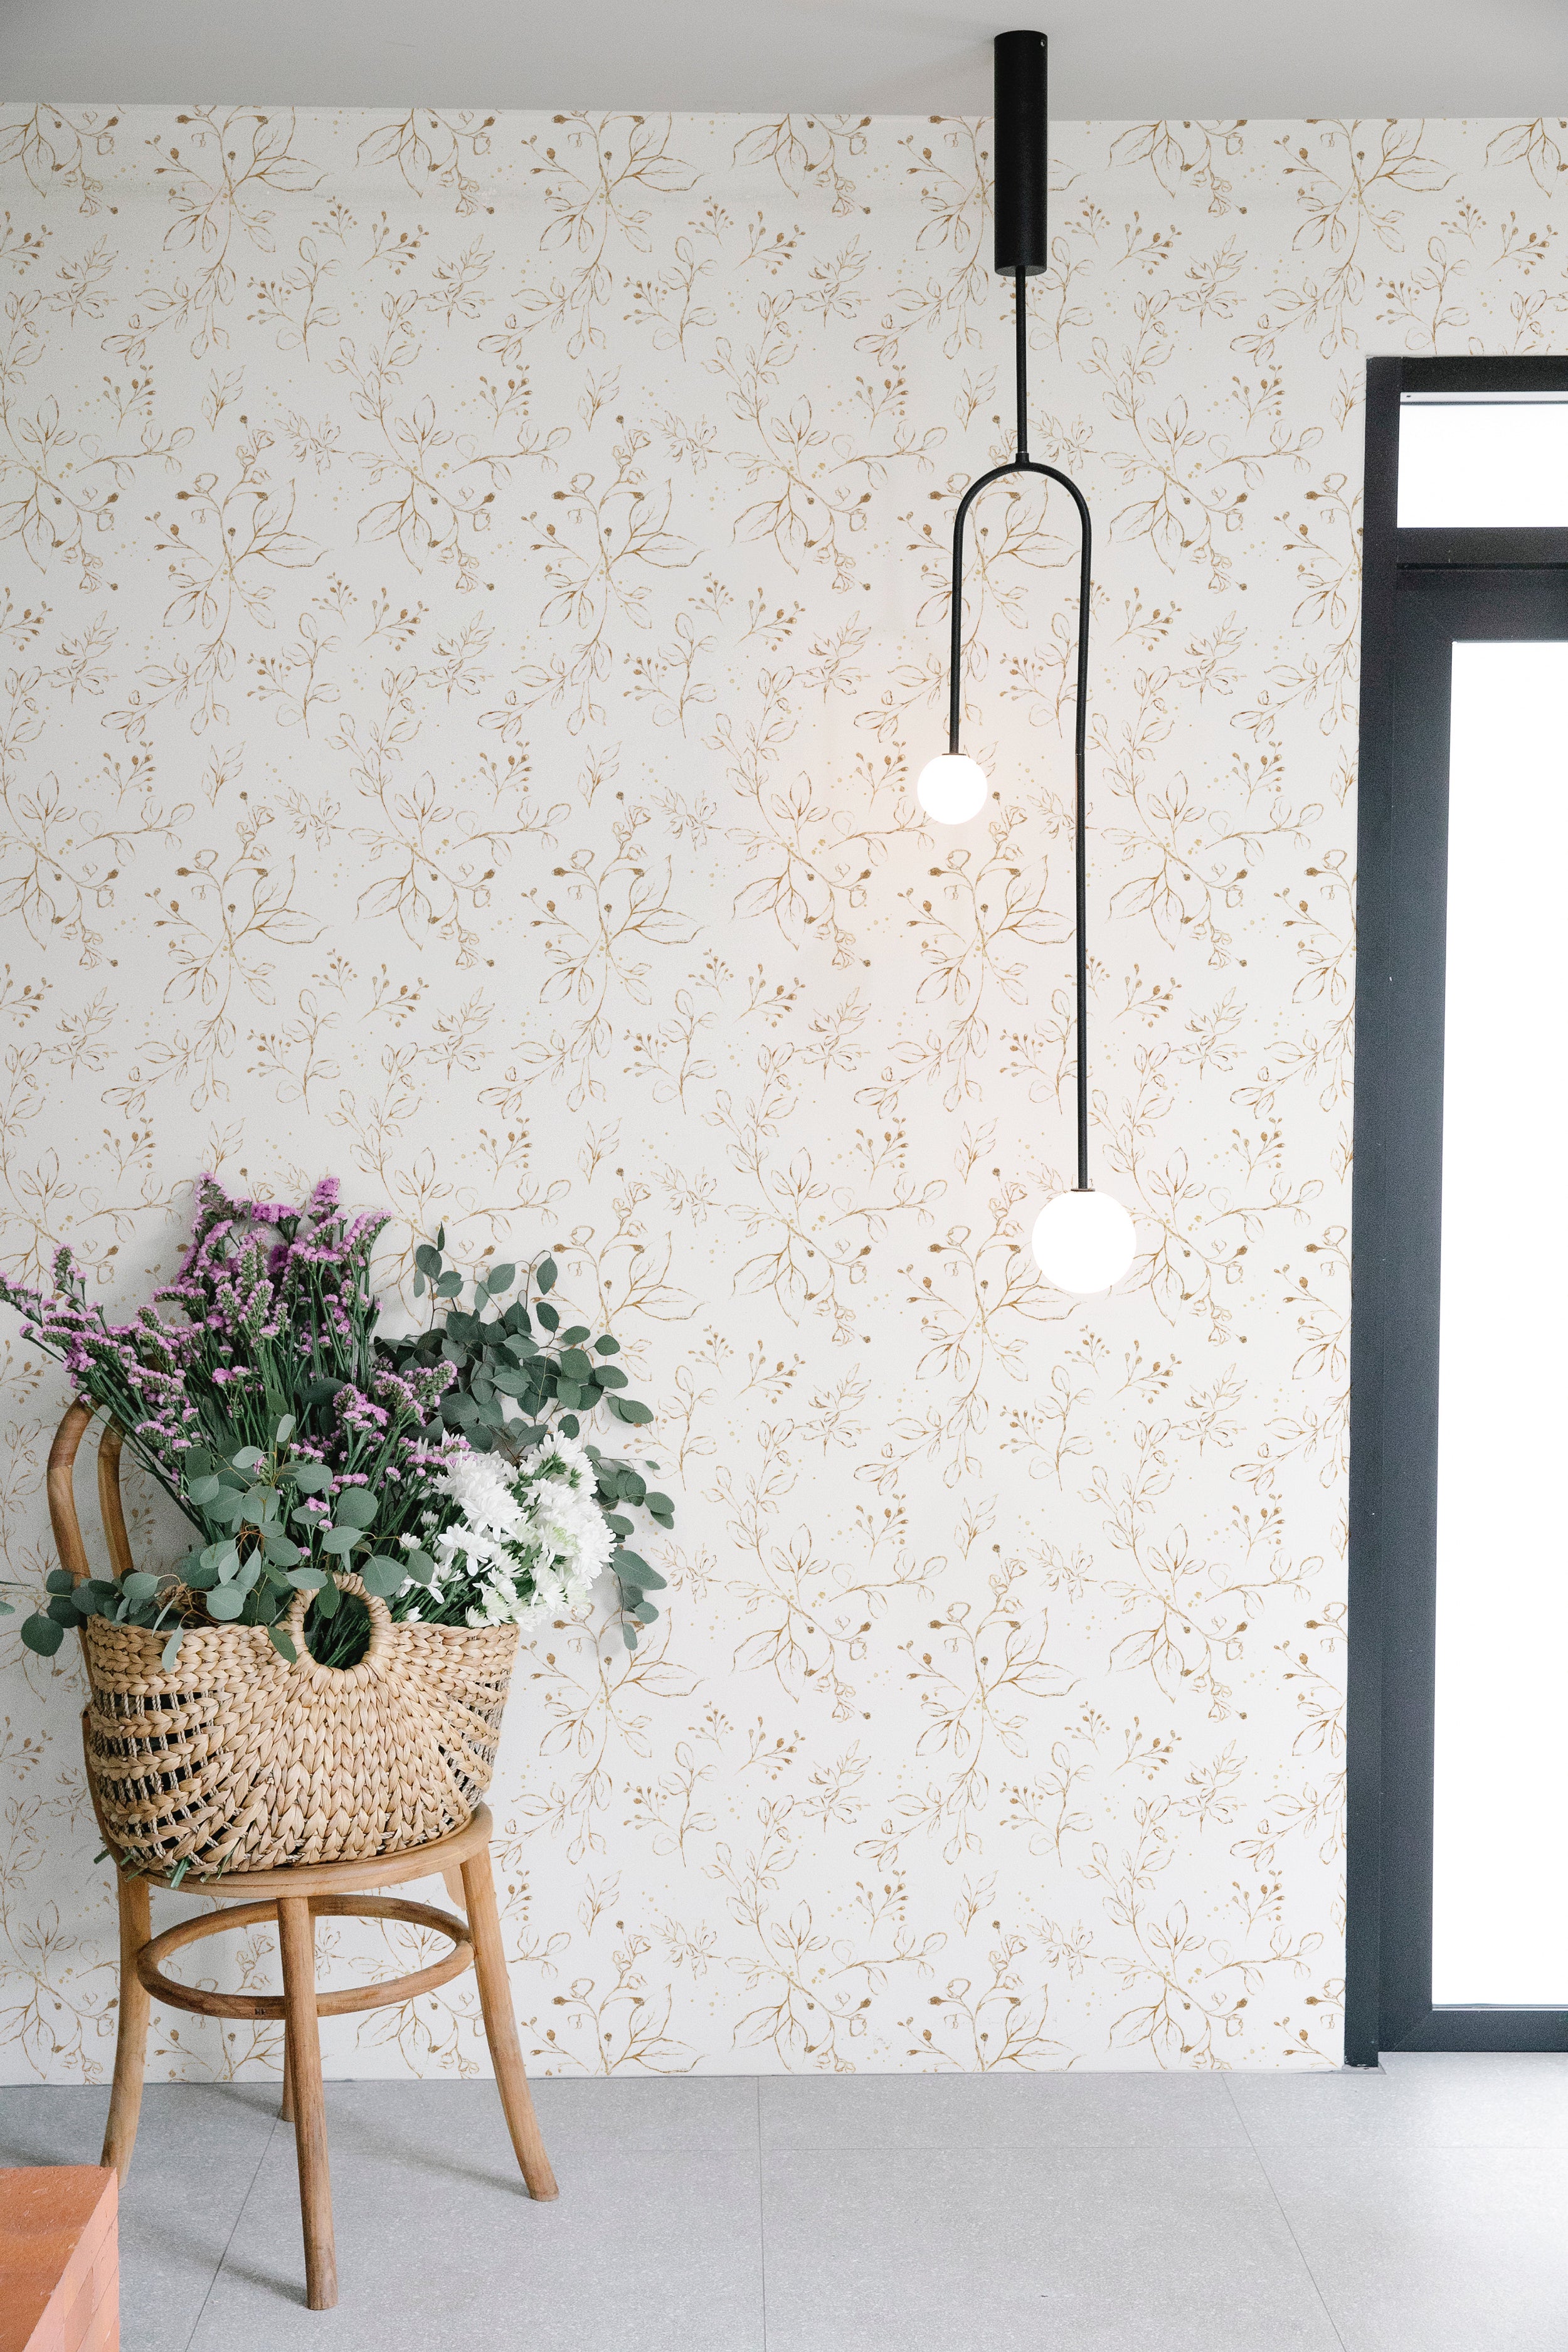 Modern interior design utilizing Gold Leaves Wallpaper, where the golden botanical illustrations provide a refined backdrop to a contemporary room with pendant lighting and a basket of fresh flowers.